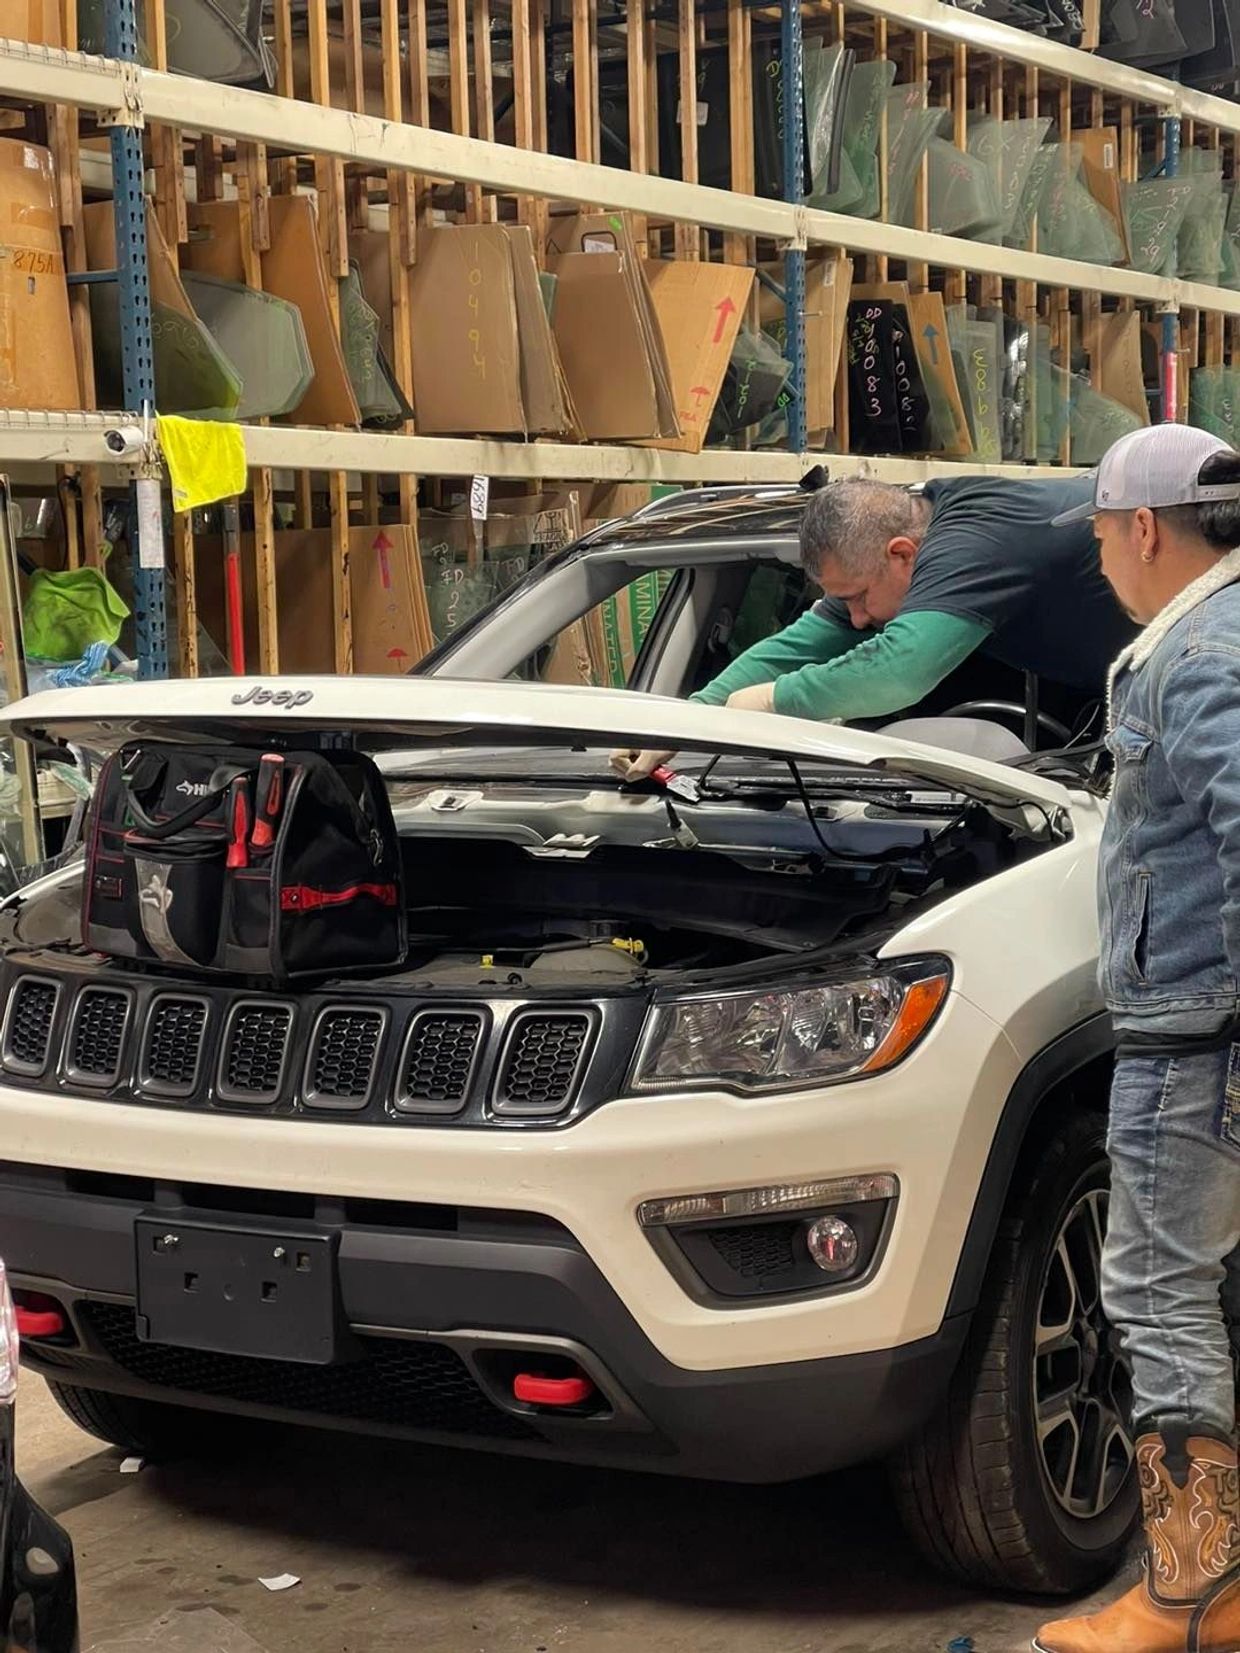 1 person replacing a car's front  windshield and second person with boots looking at how he works